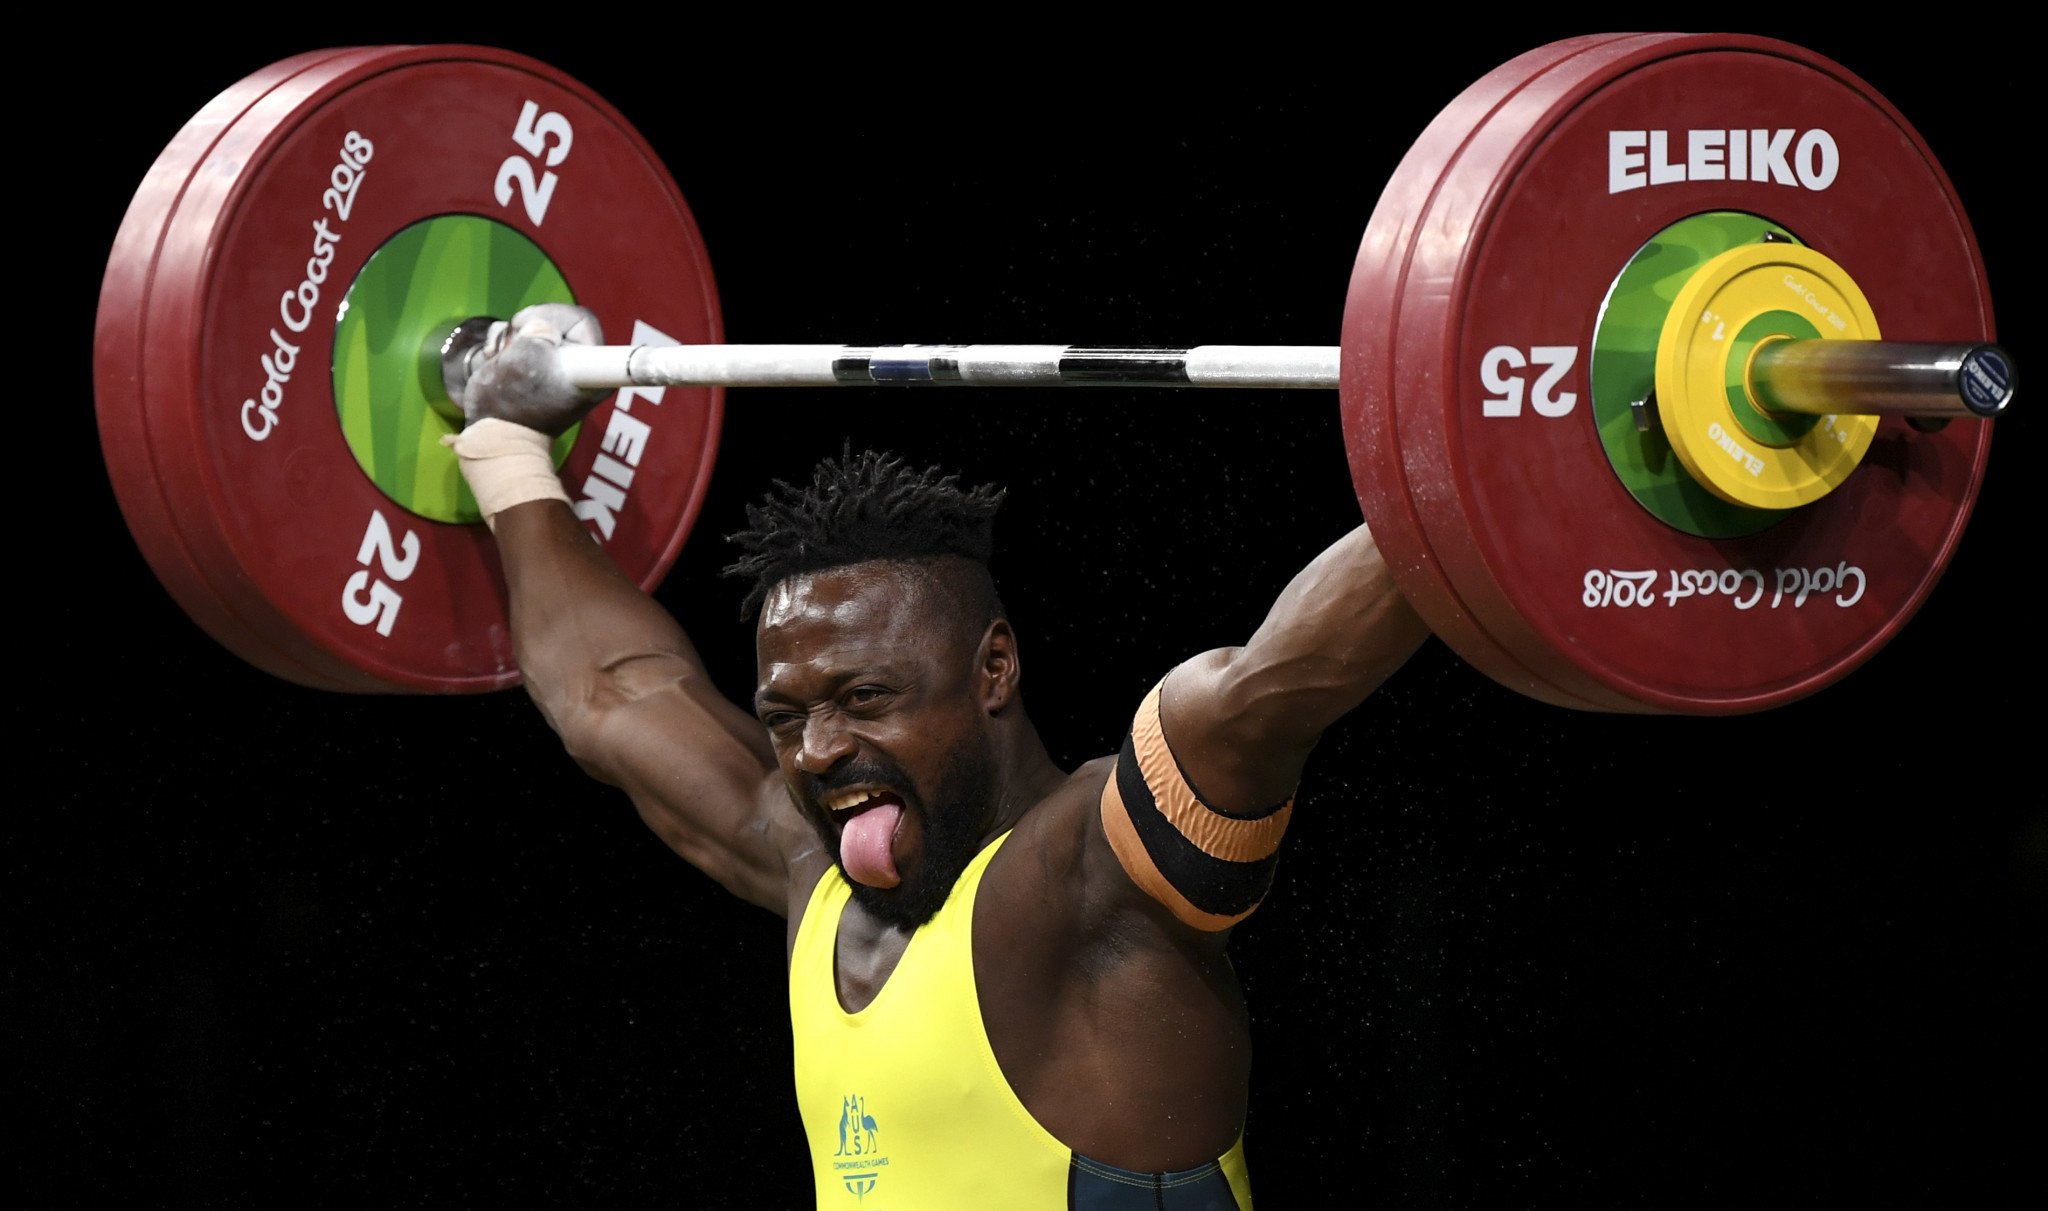 Francois Etoundi finished third in the men's 77kg event at Gold Coast 2018 ©Getty Images